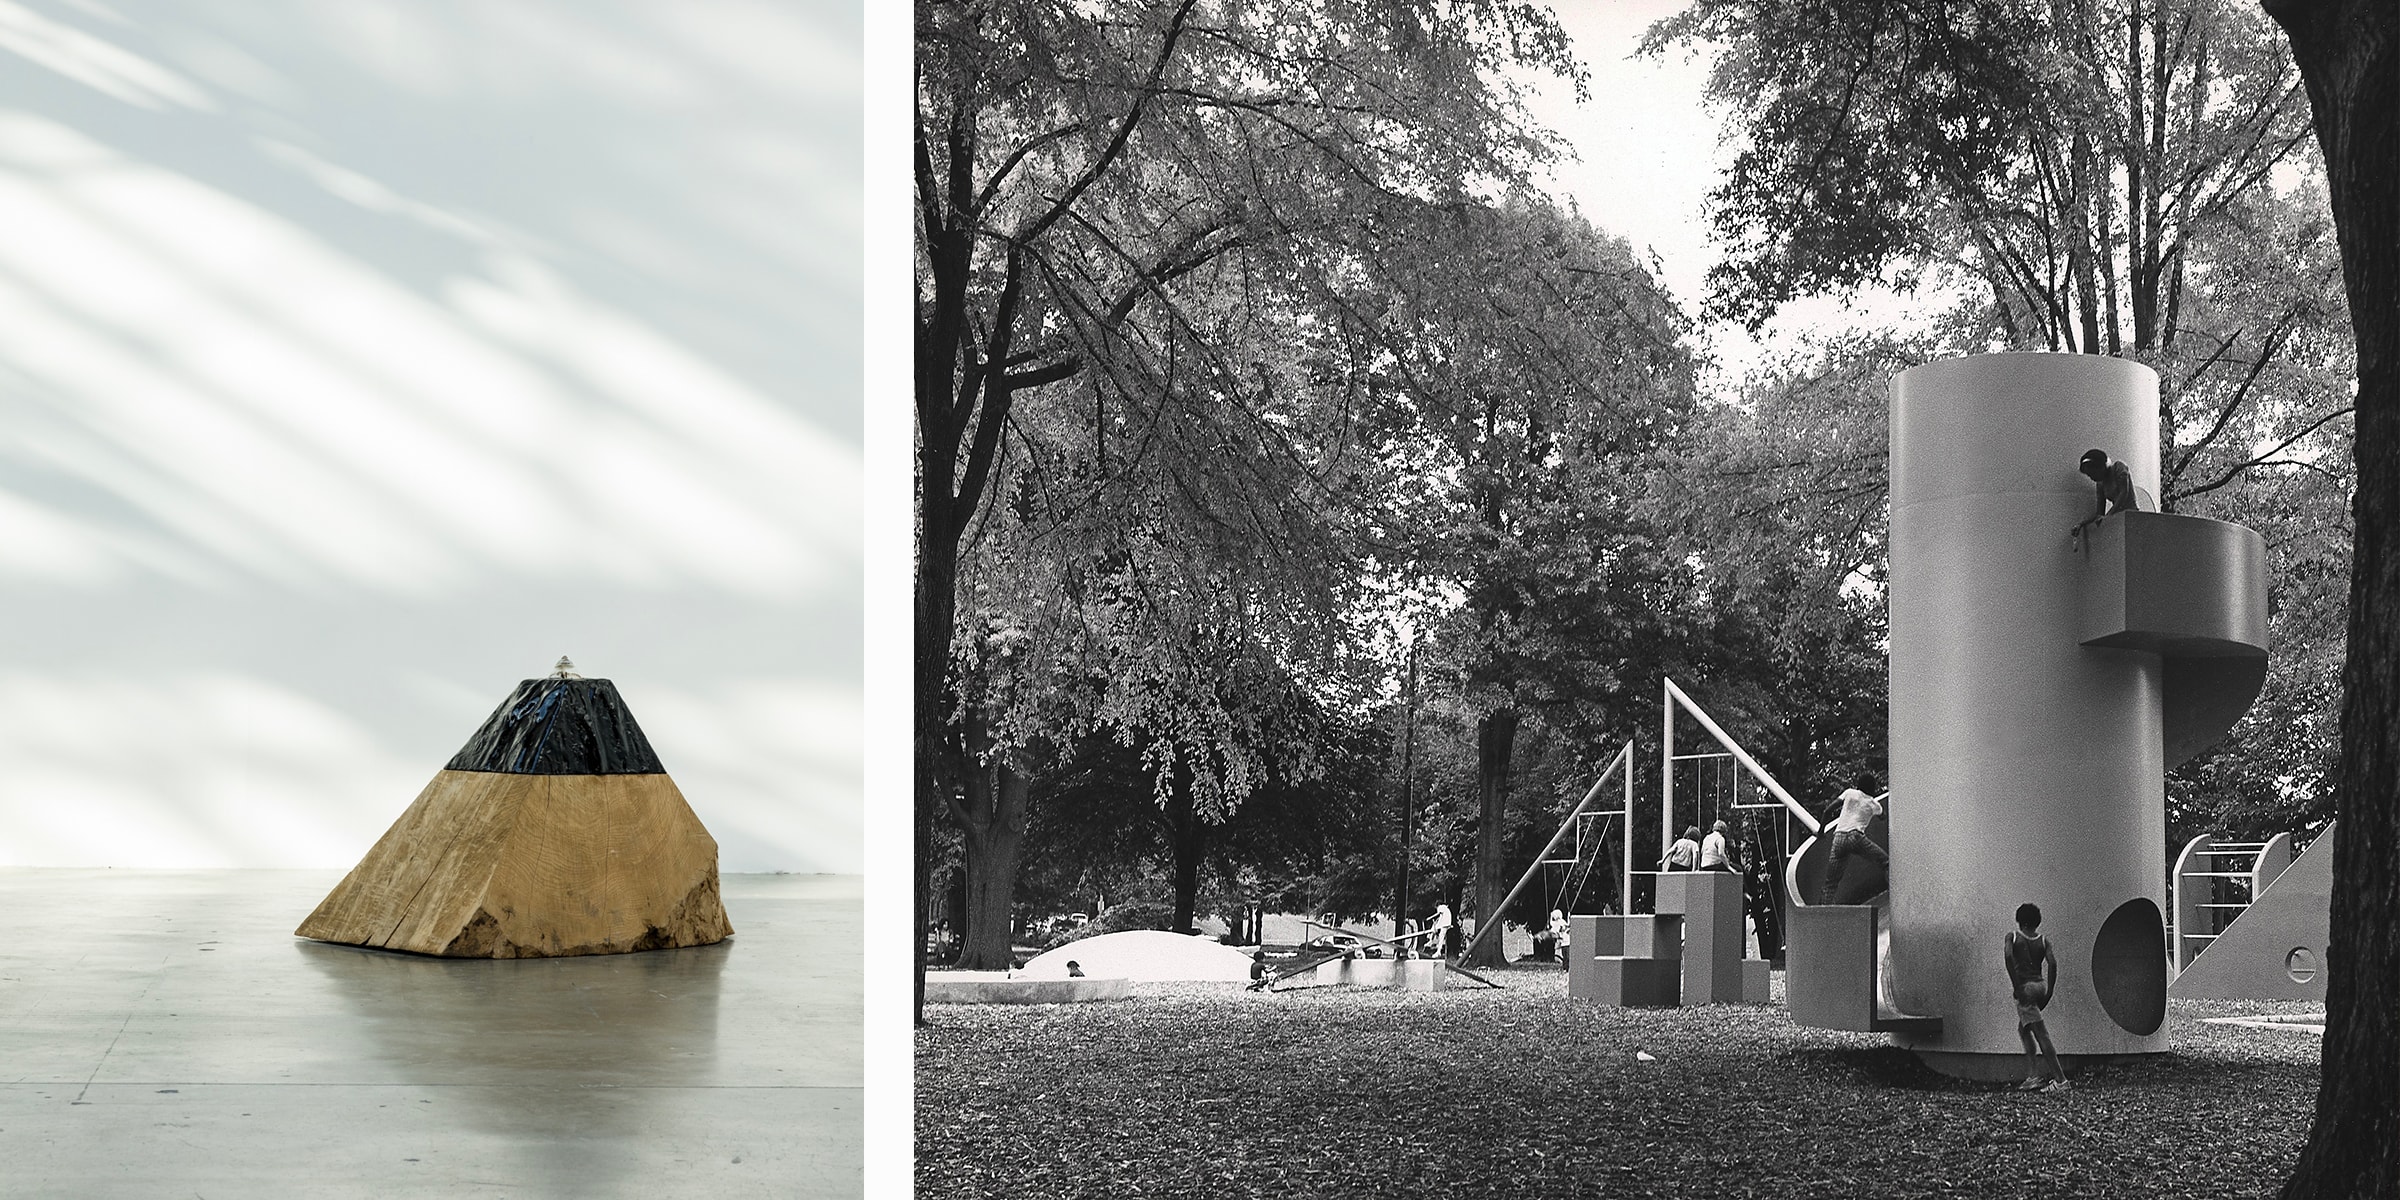 Left: Theaster Gates, Amalgam #1, 2019. Photograph by Chris Strong. © Theaster Gates. Right: Isamu Noguchi, Playscapes, Piedmont Park, Atlanta, Georgia, 1975–76. The Noguchi Museum Archives, 02170. © The Isamu Noguchi Foundation and Garden Museum, NY / Artists Rights Society (ARS).